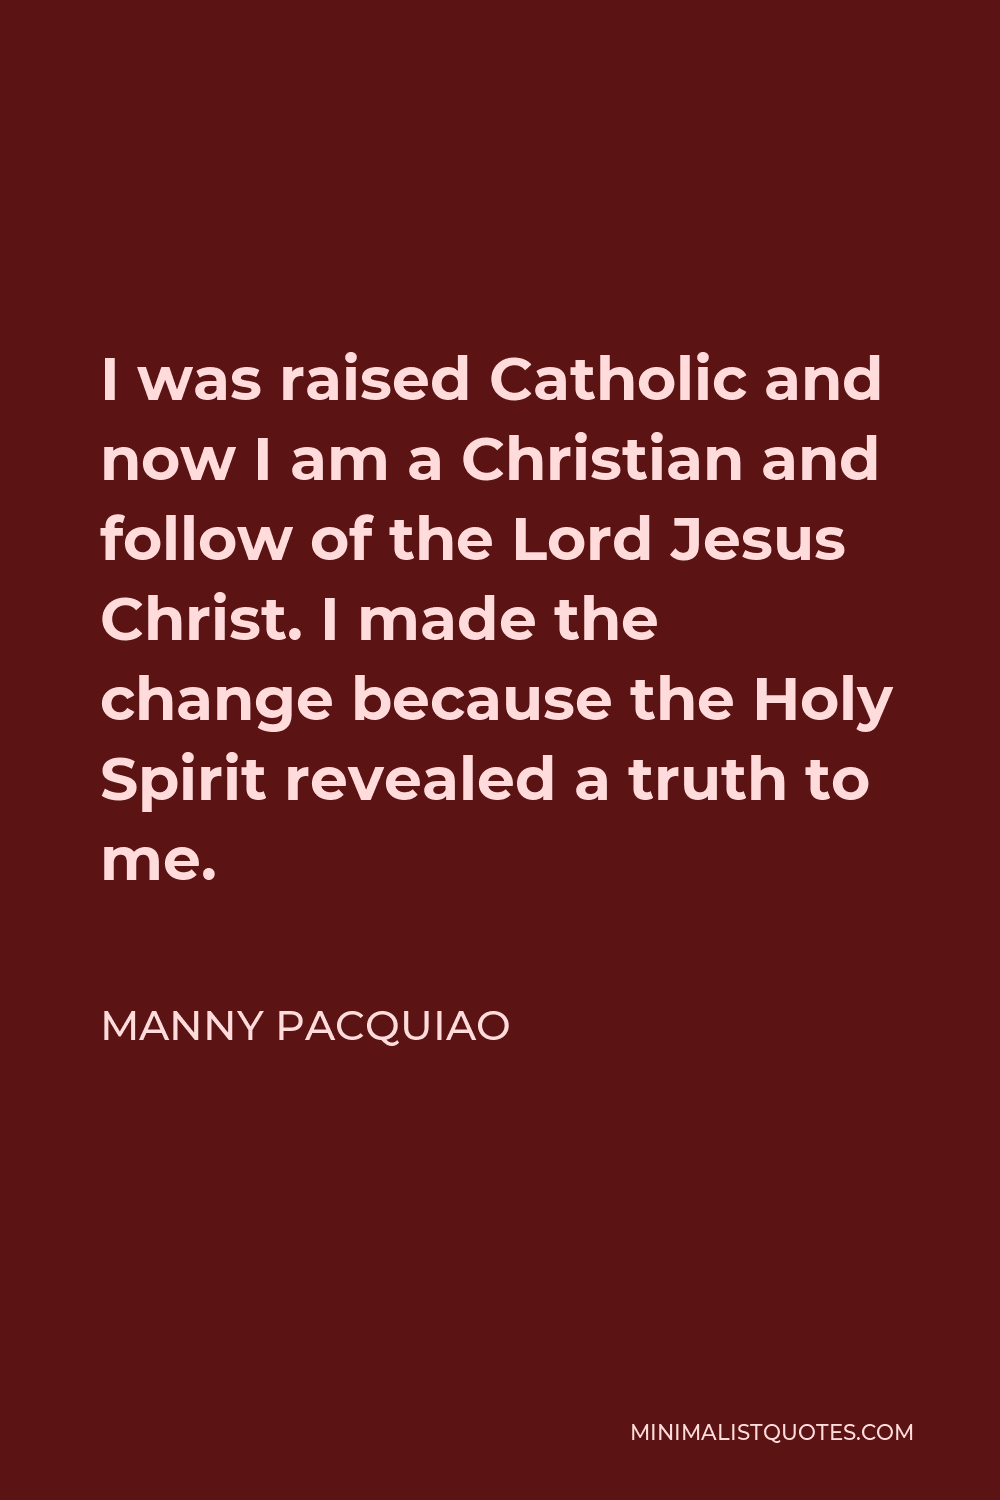 Manny Pacquiao Quote - I was raised Catholic and now I am a Christian and follow of the Lord Jesus Christ. I made the change because the Holy Spirit revealed a truth to me.